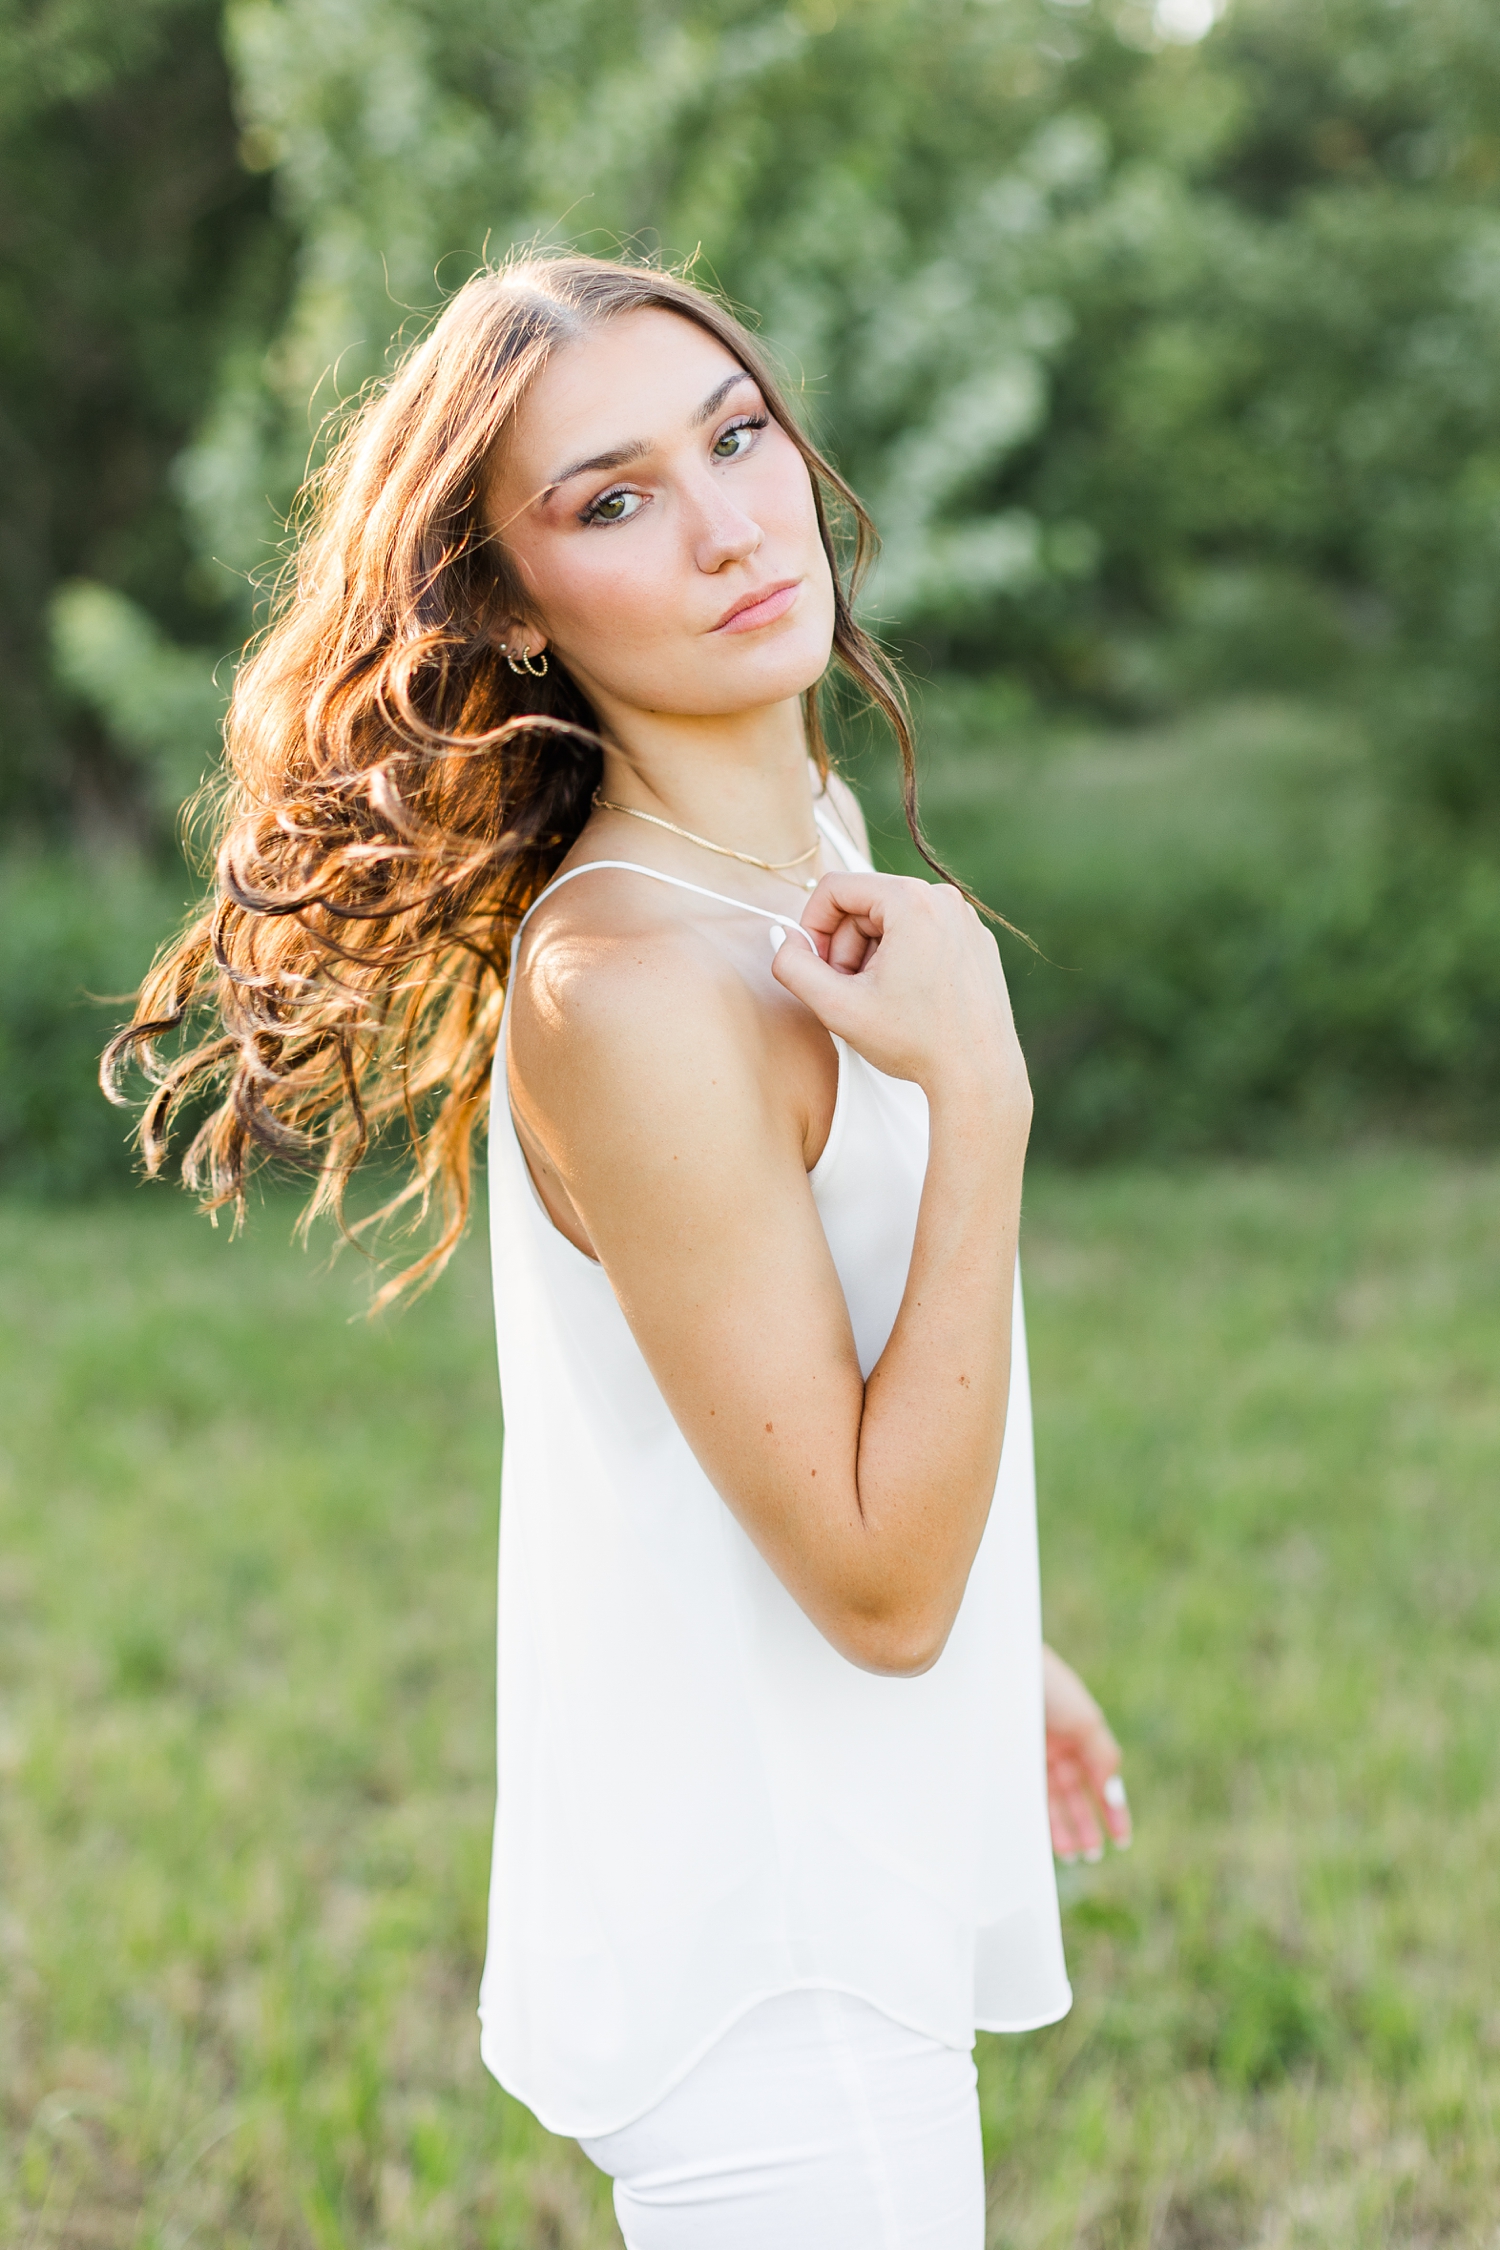 Mallory turns over her shoulder with her hair blowing in the wind wearing white jeans and a white tank top | CB Studio